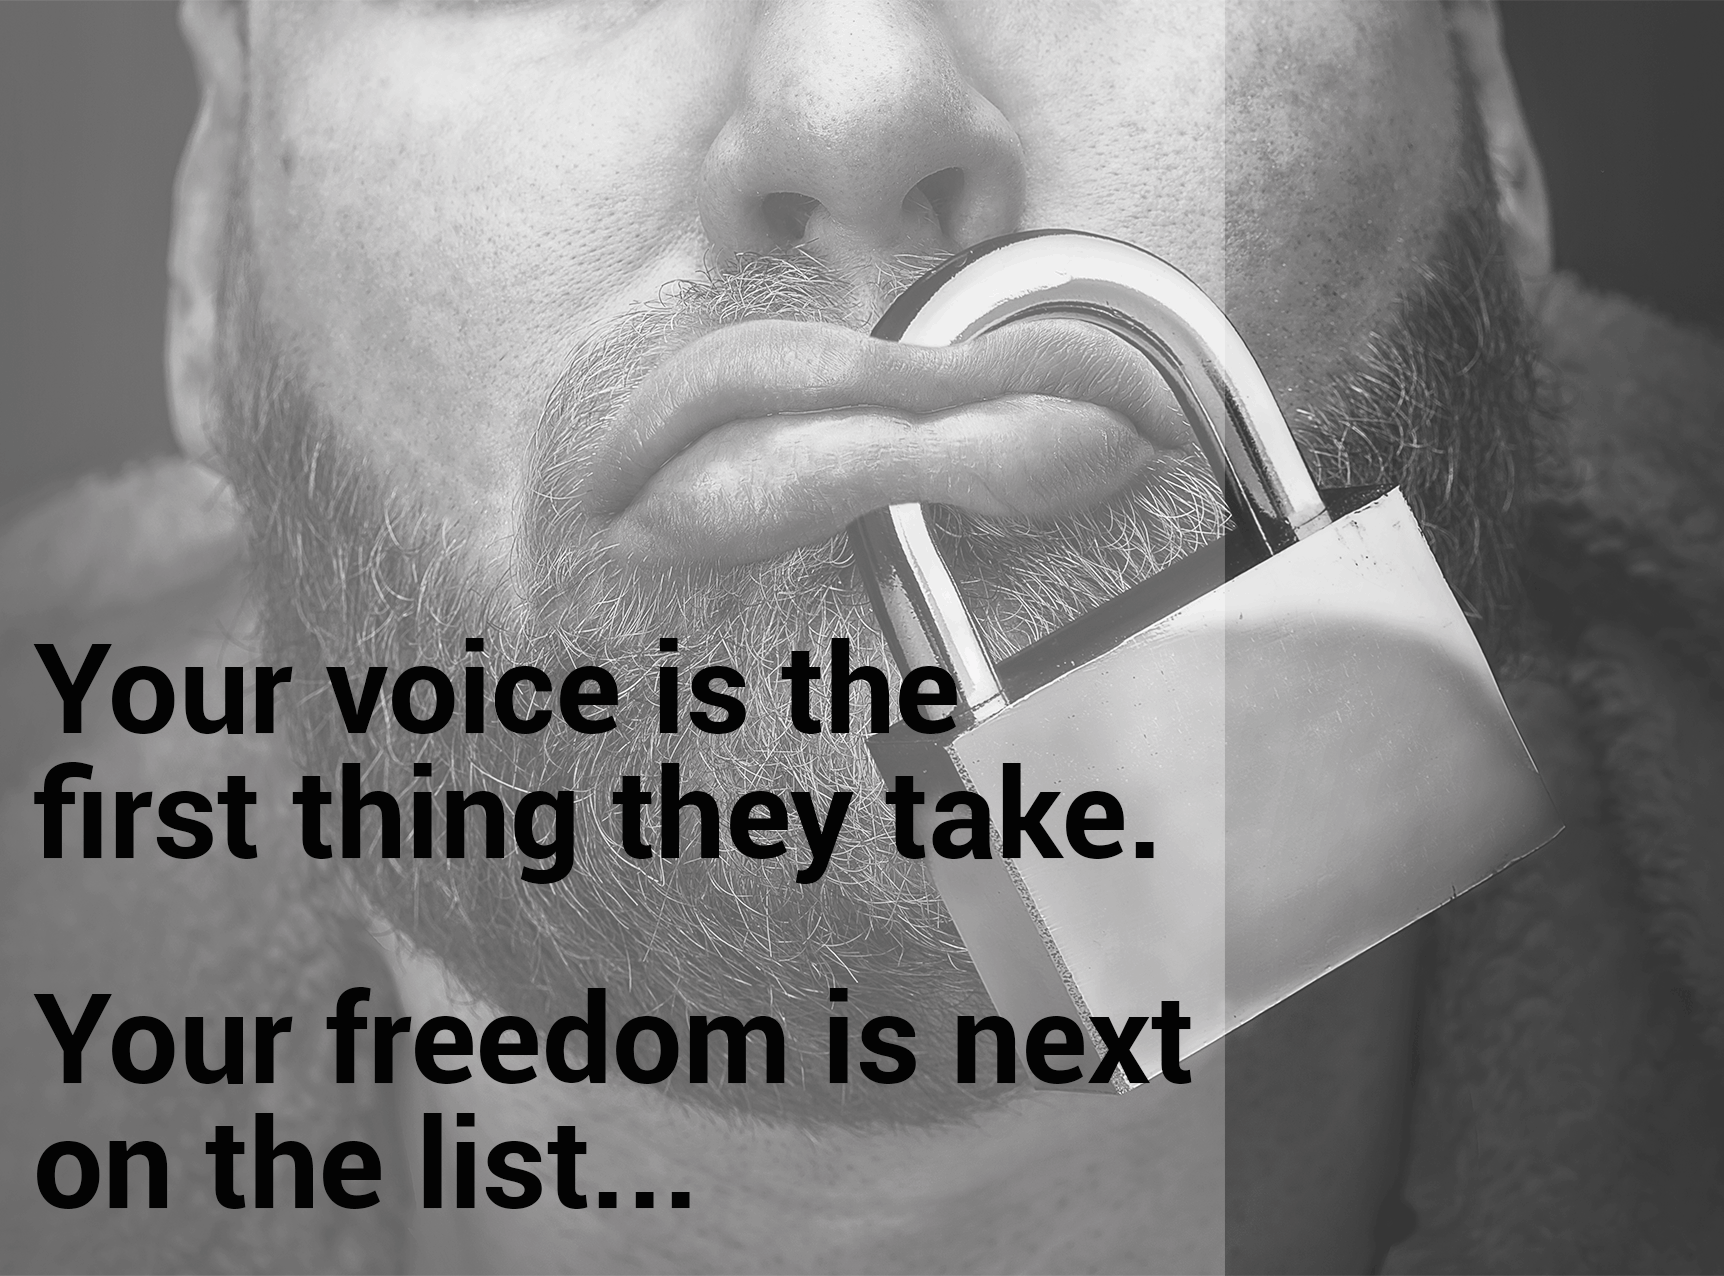 Your voice is the first thing they take